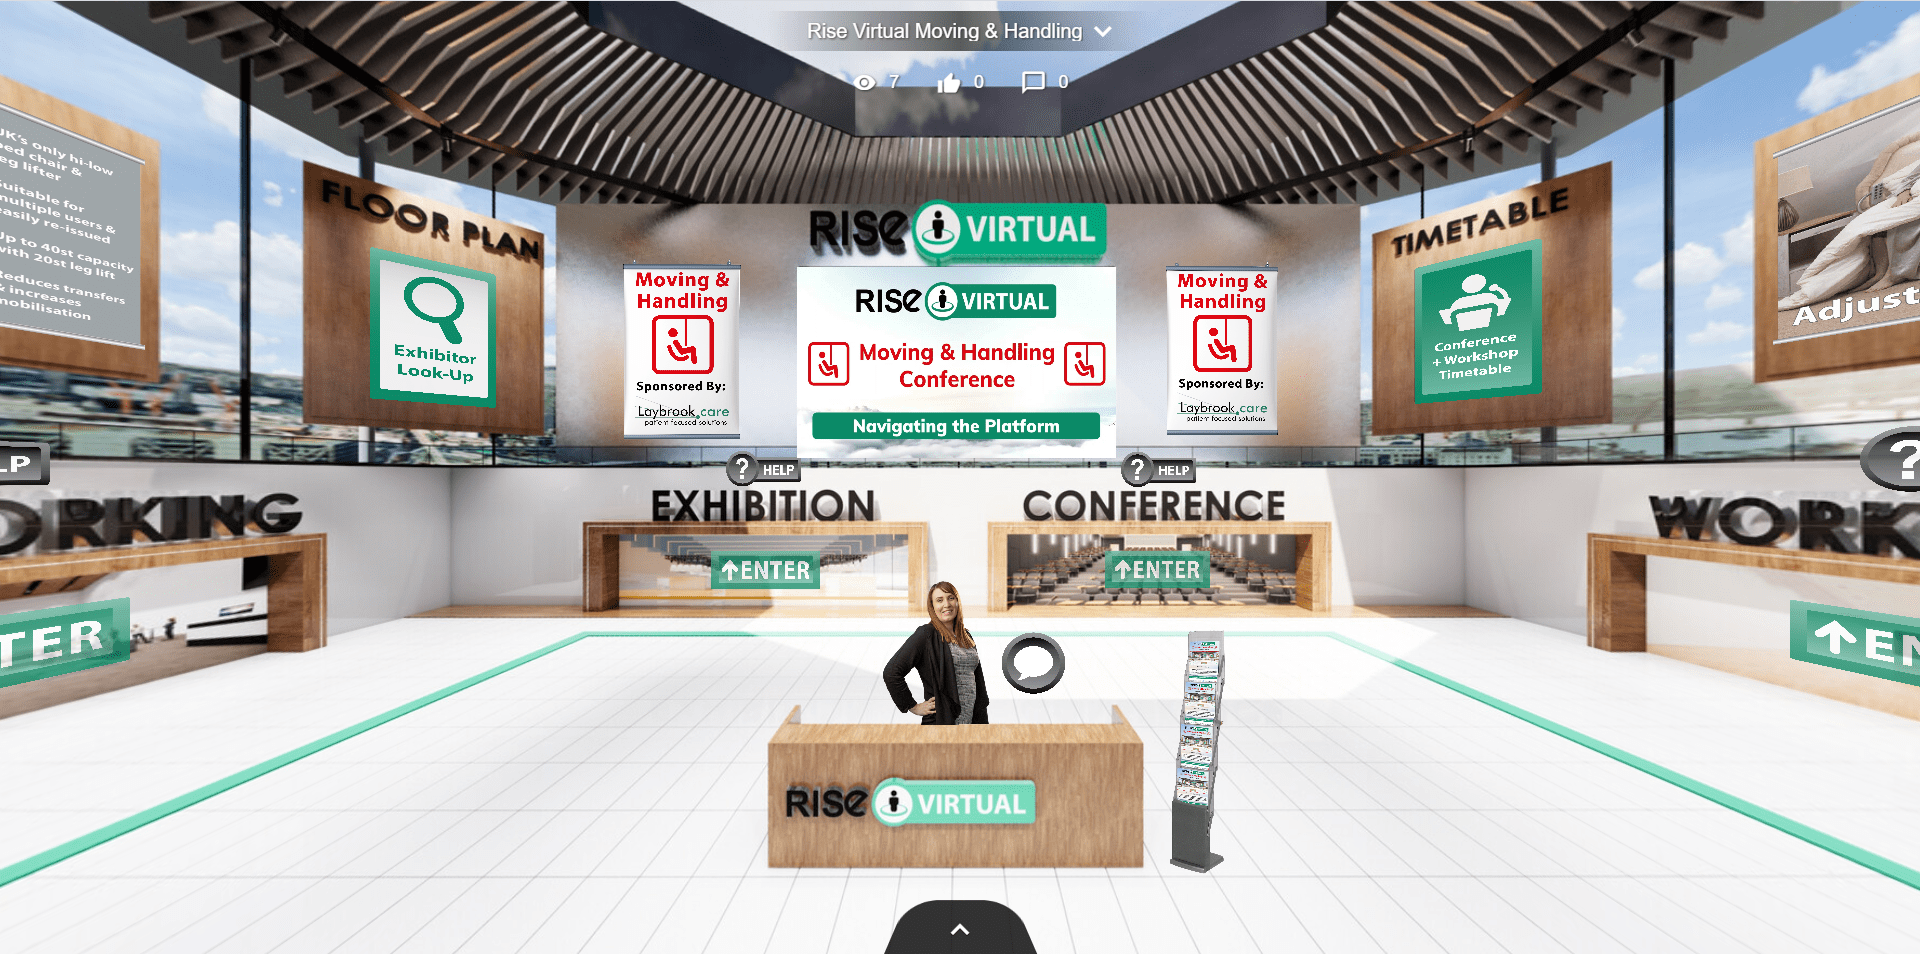 The customized exhibition entrance of Rise4Disability. The advanced tag functions provided flexibility to create a
		unique and welcoming experience.